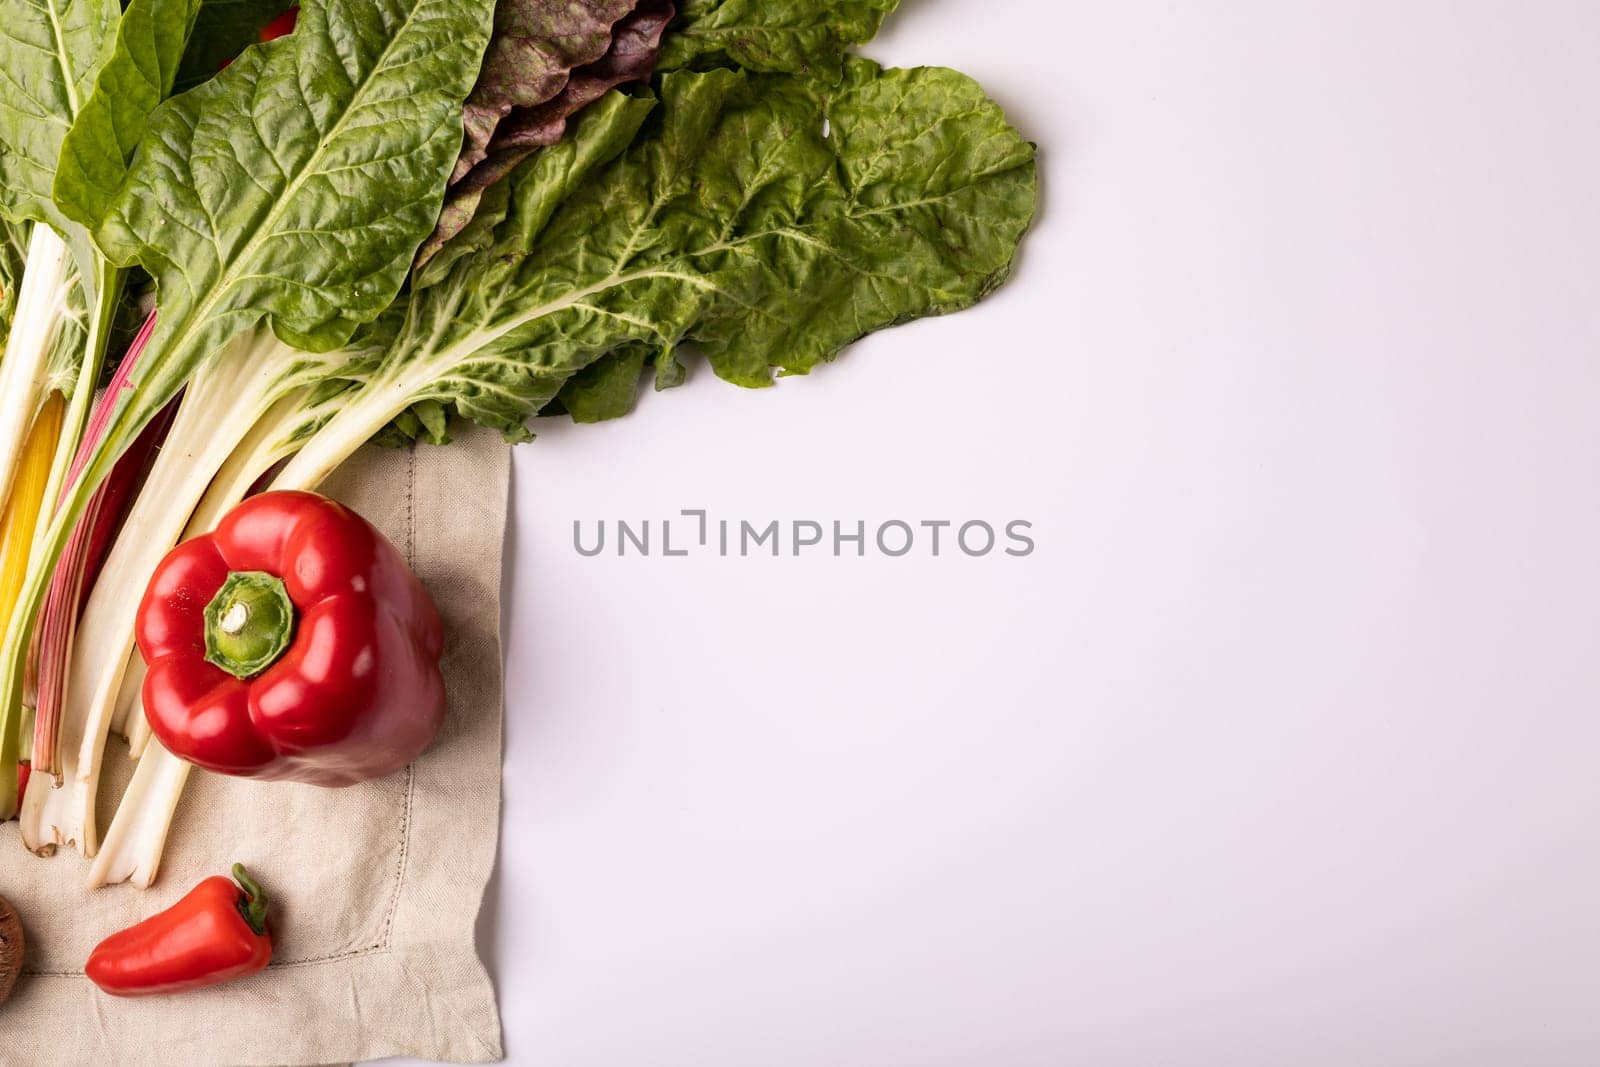 Overhead view of fresh chard with red bell and chili peppers by copy space on white background. unaltered, food, healthy eating, organic concept.